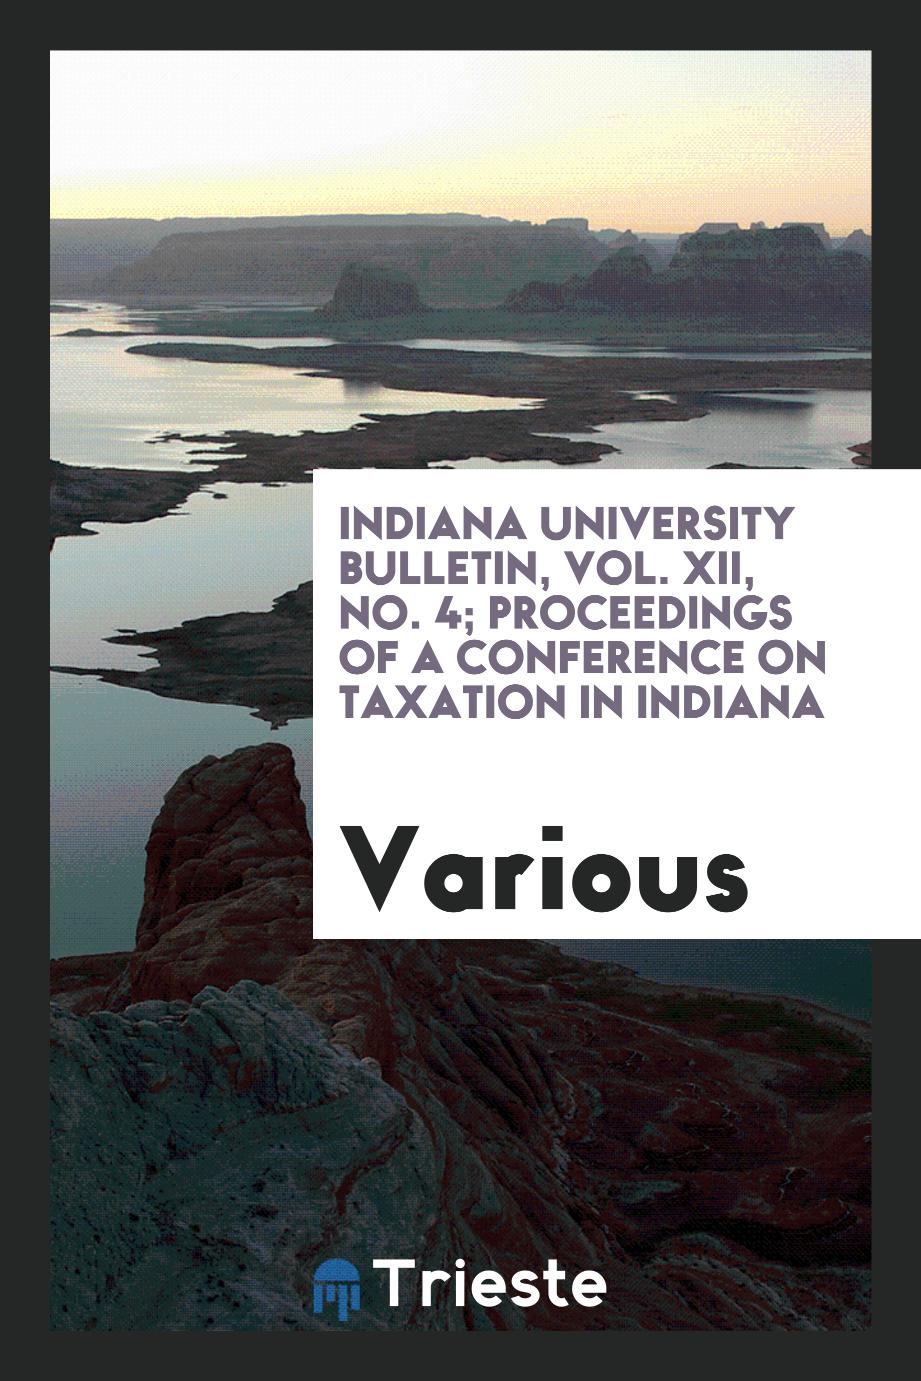 Indiana University Bulletin, Vol. XII, No. 4; Proceedings of a conference on taxation in Indiana